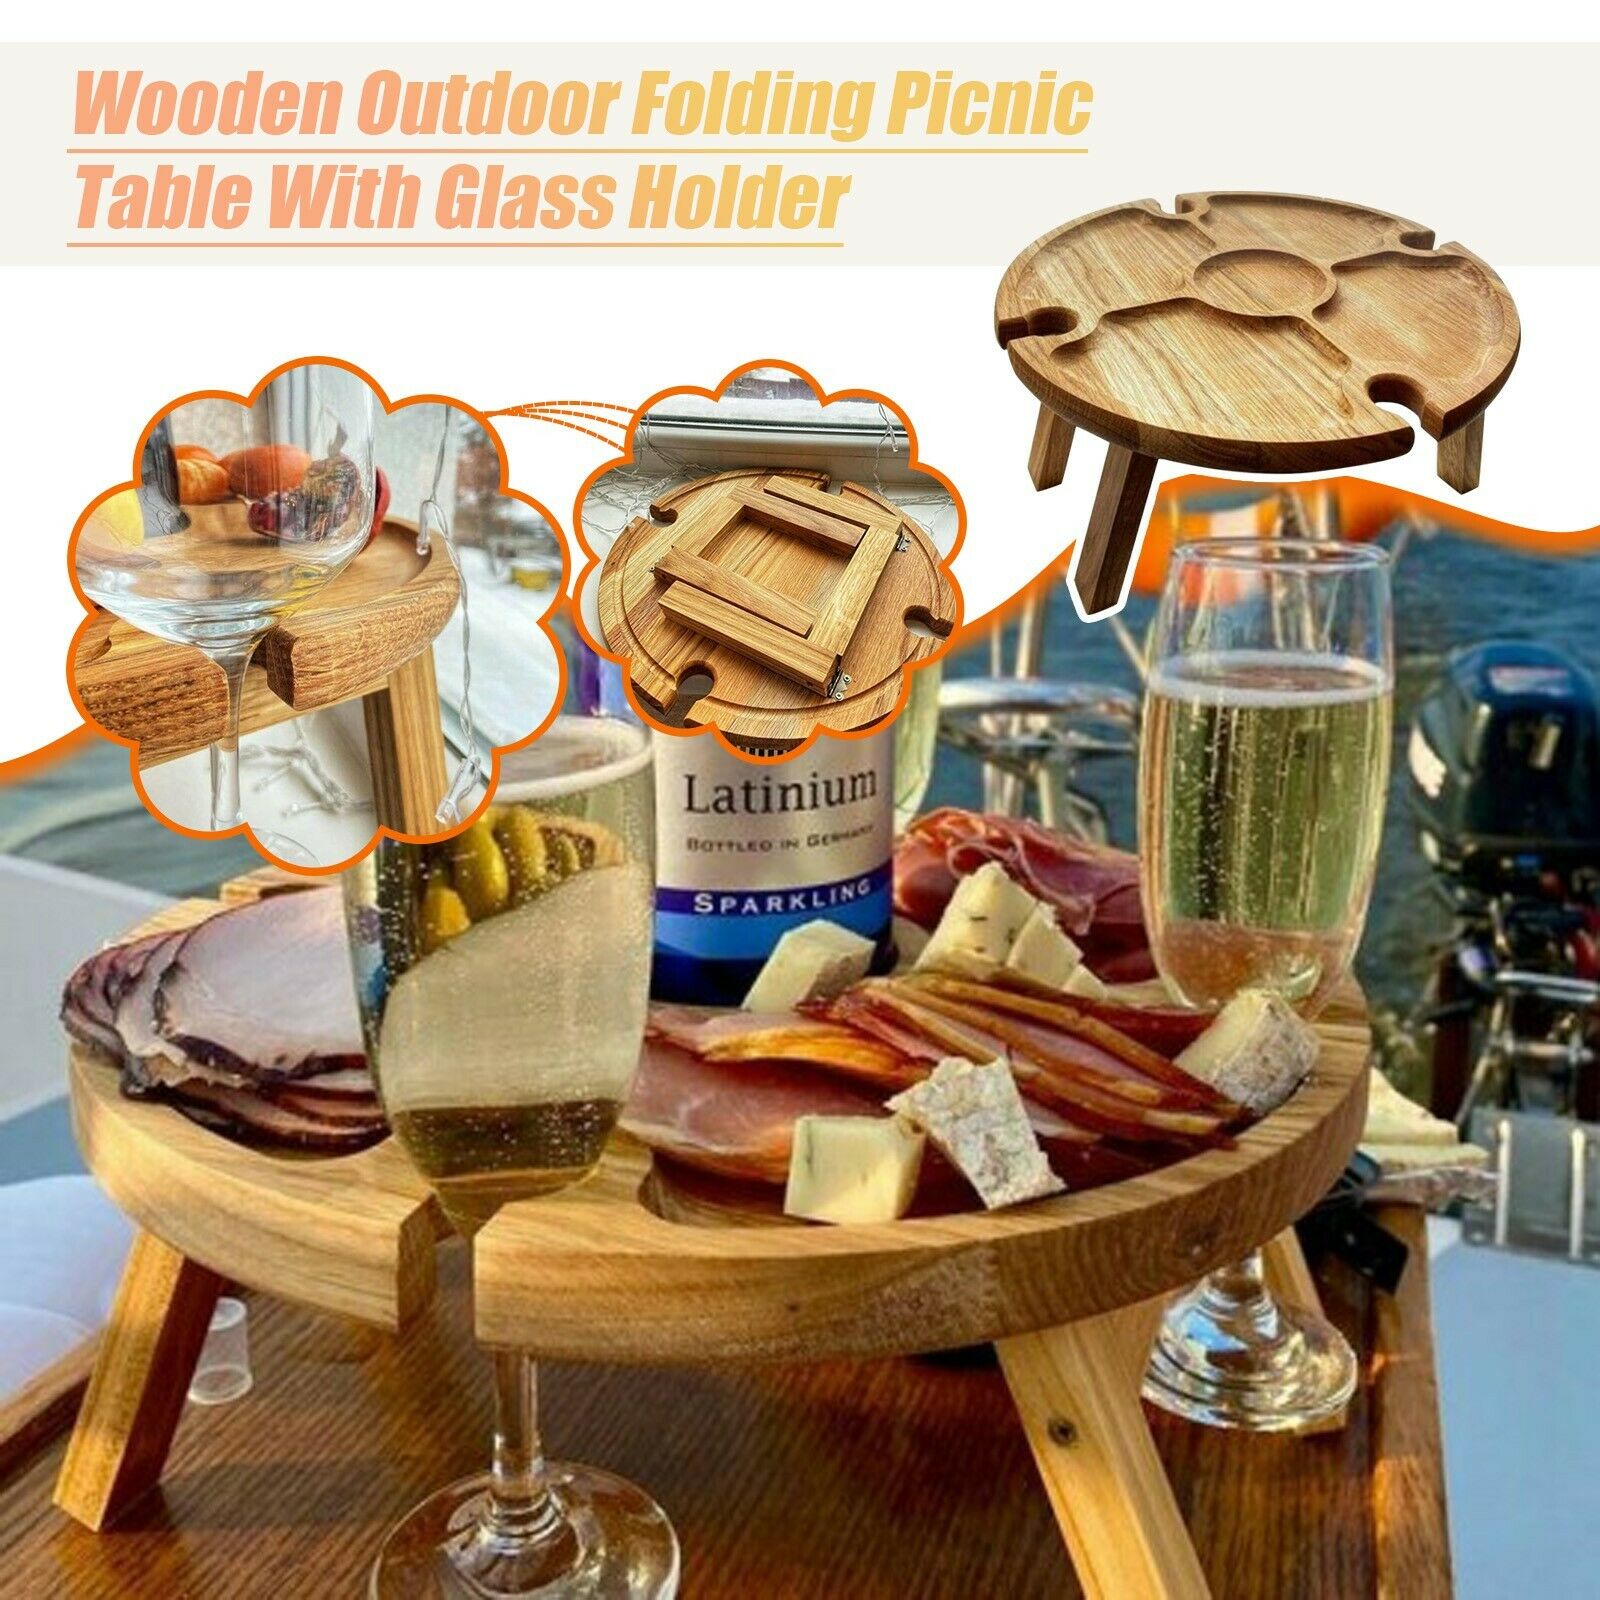 Wooden Outdoor Folding Picnic-Table With Glass Holder 2 In 1 Wine Glass Rack